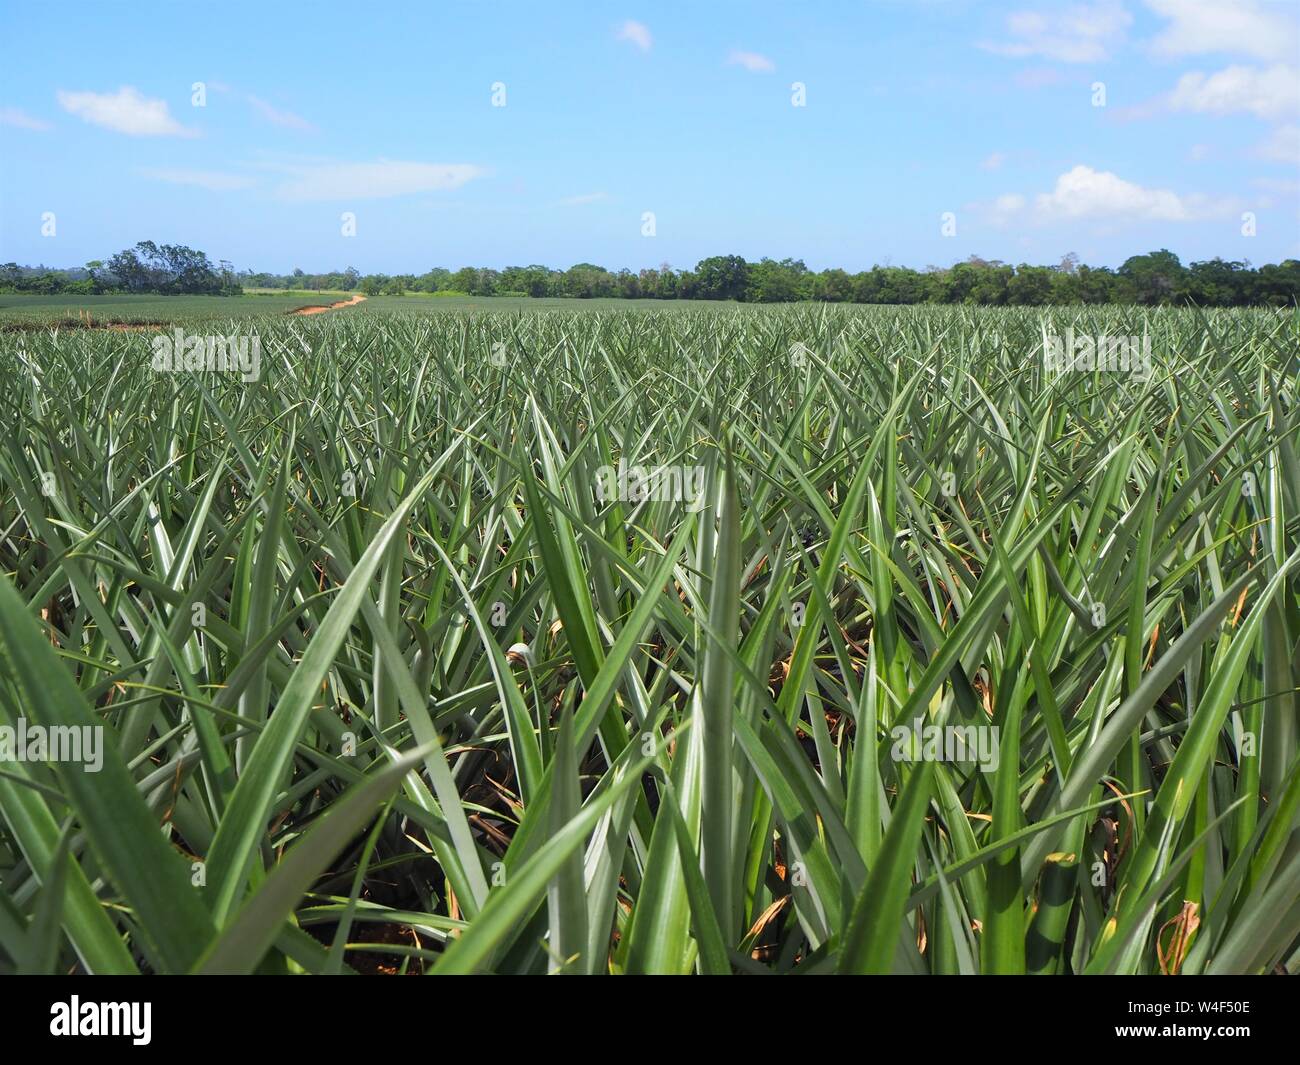 Pineapples growing in a field in Honduras for Dole / Standard Fruit. Industrial fruit production for canning and juice. Stock Photo